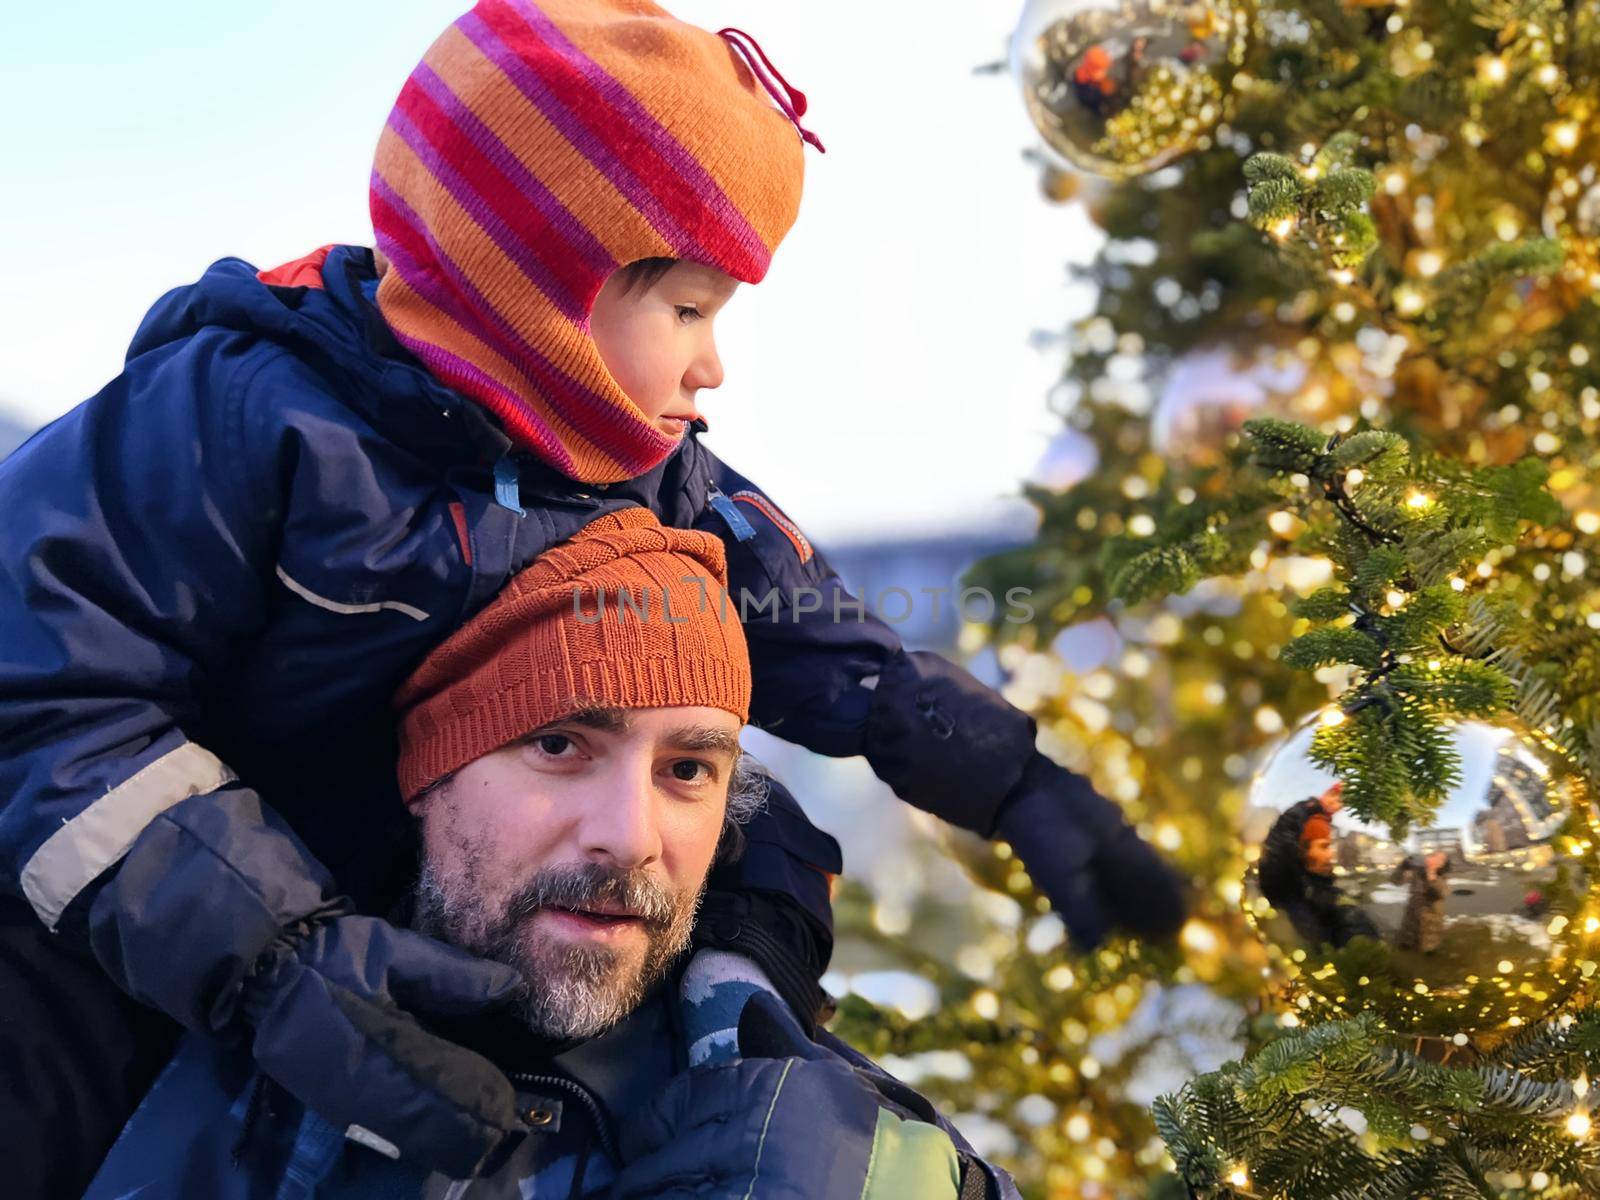 Father and son spend time together at the Christmas tree by Varaksina